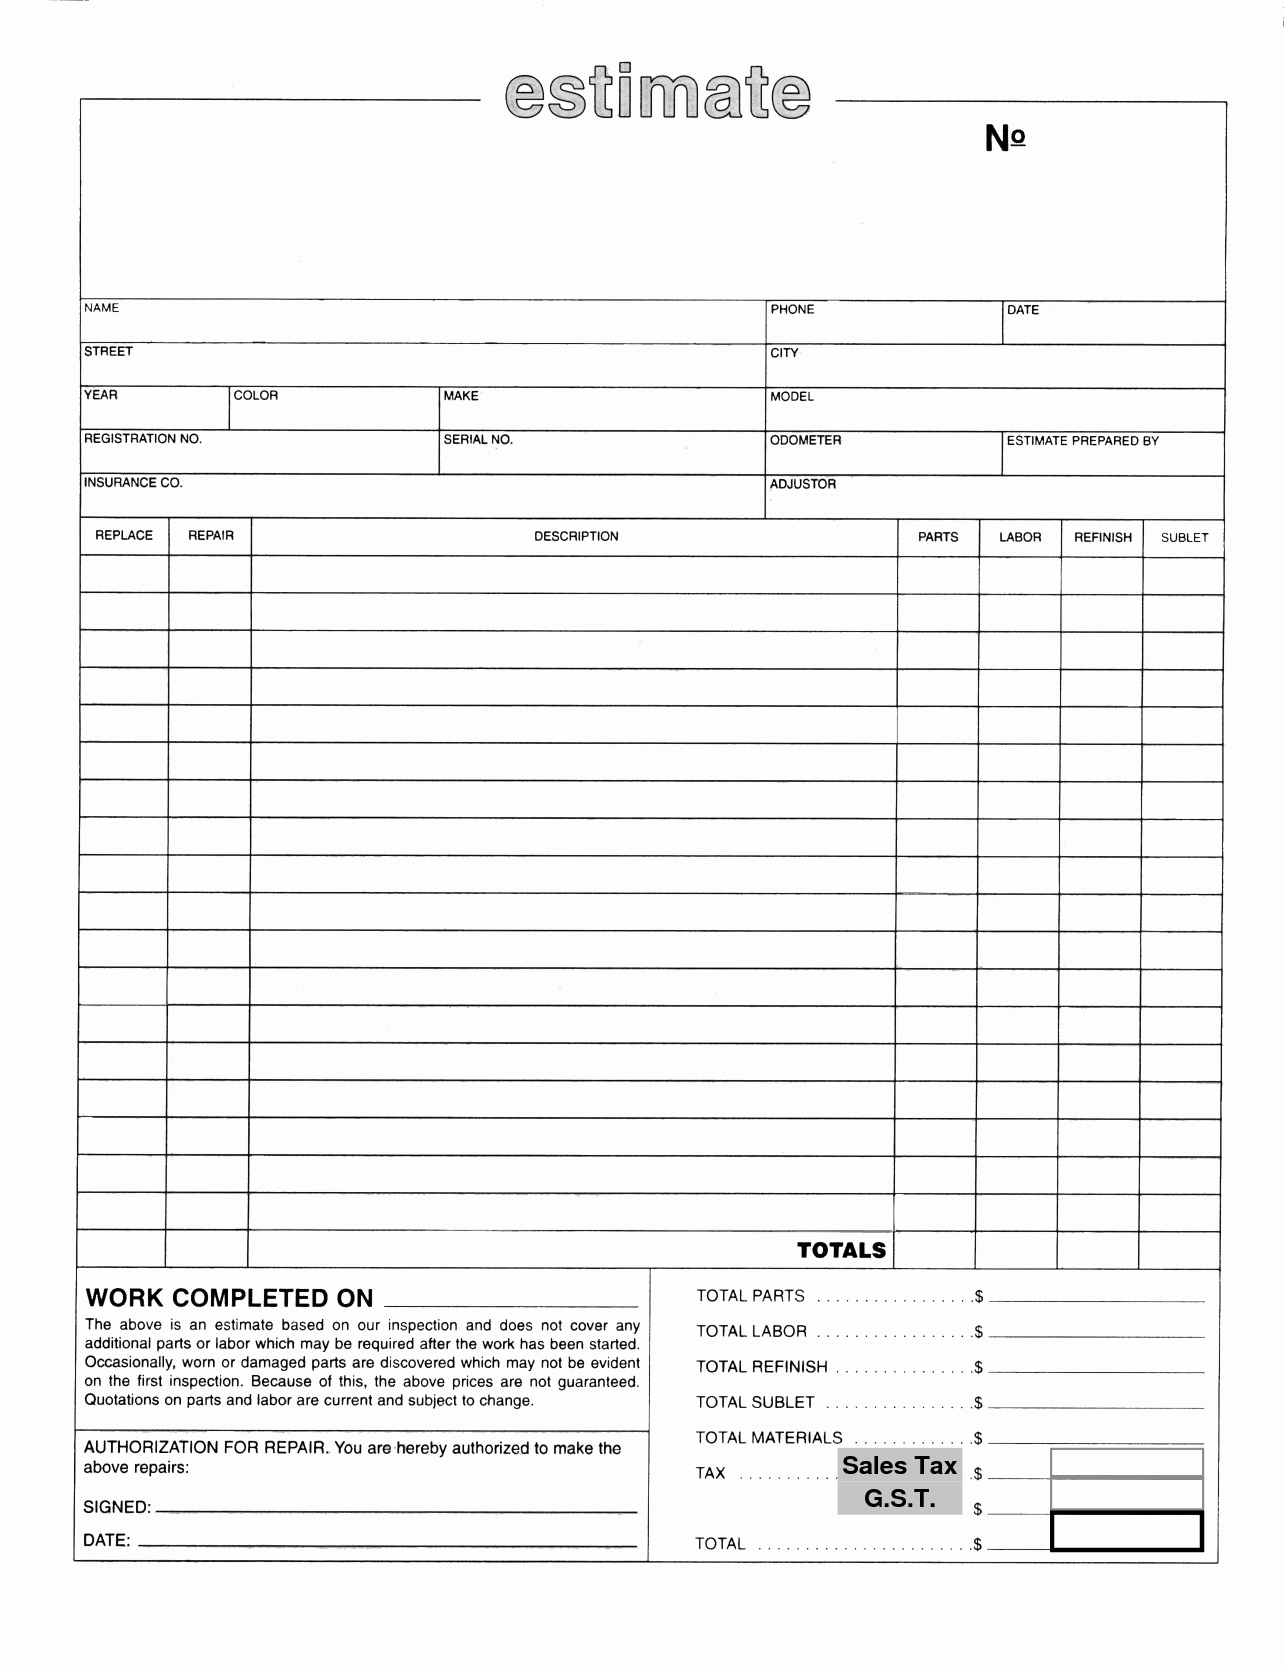 Auto Repair Work order Template Beautiful Auto Body Estimate Template Free Download Elsevier